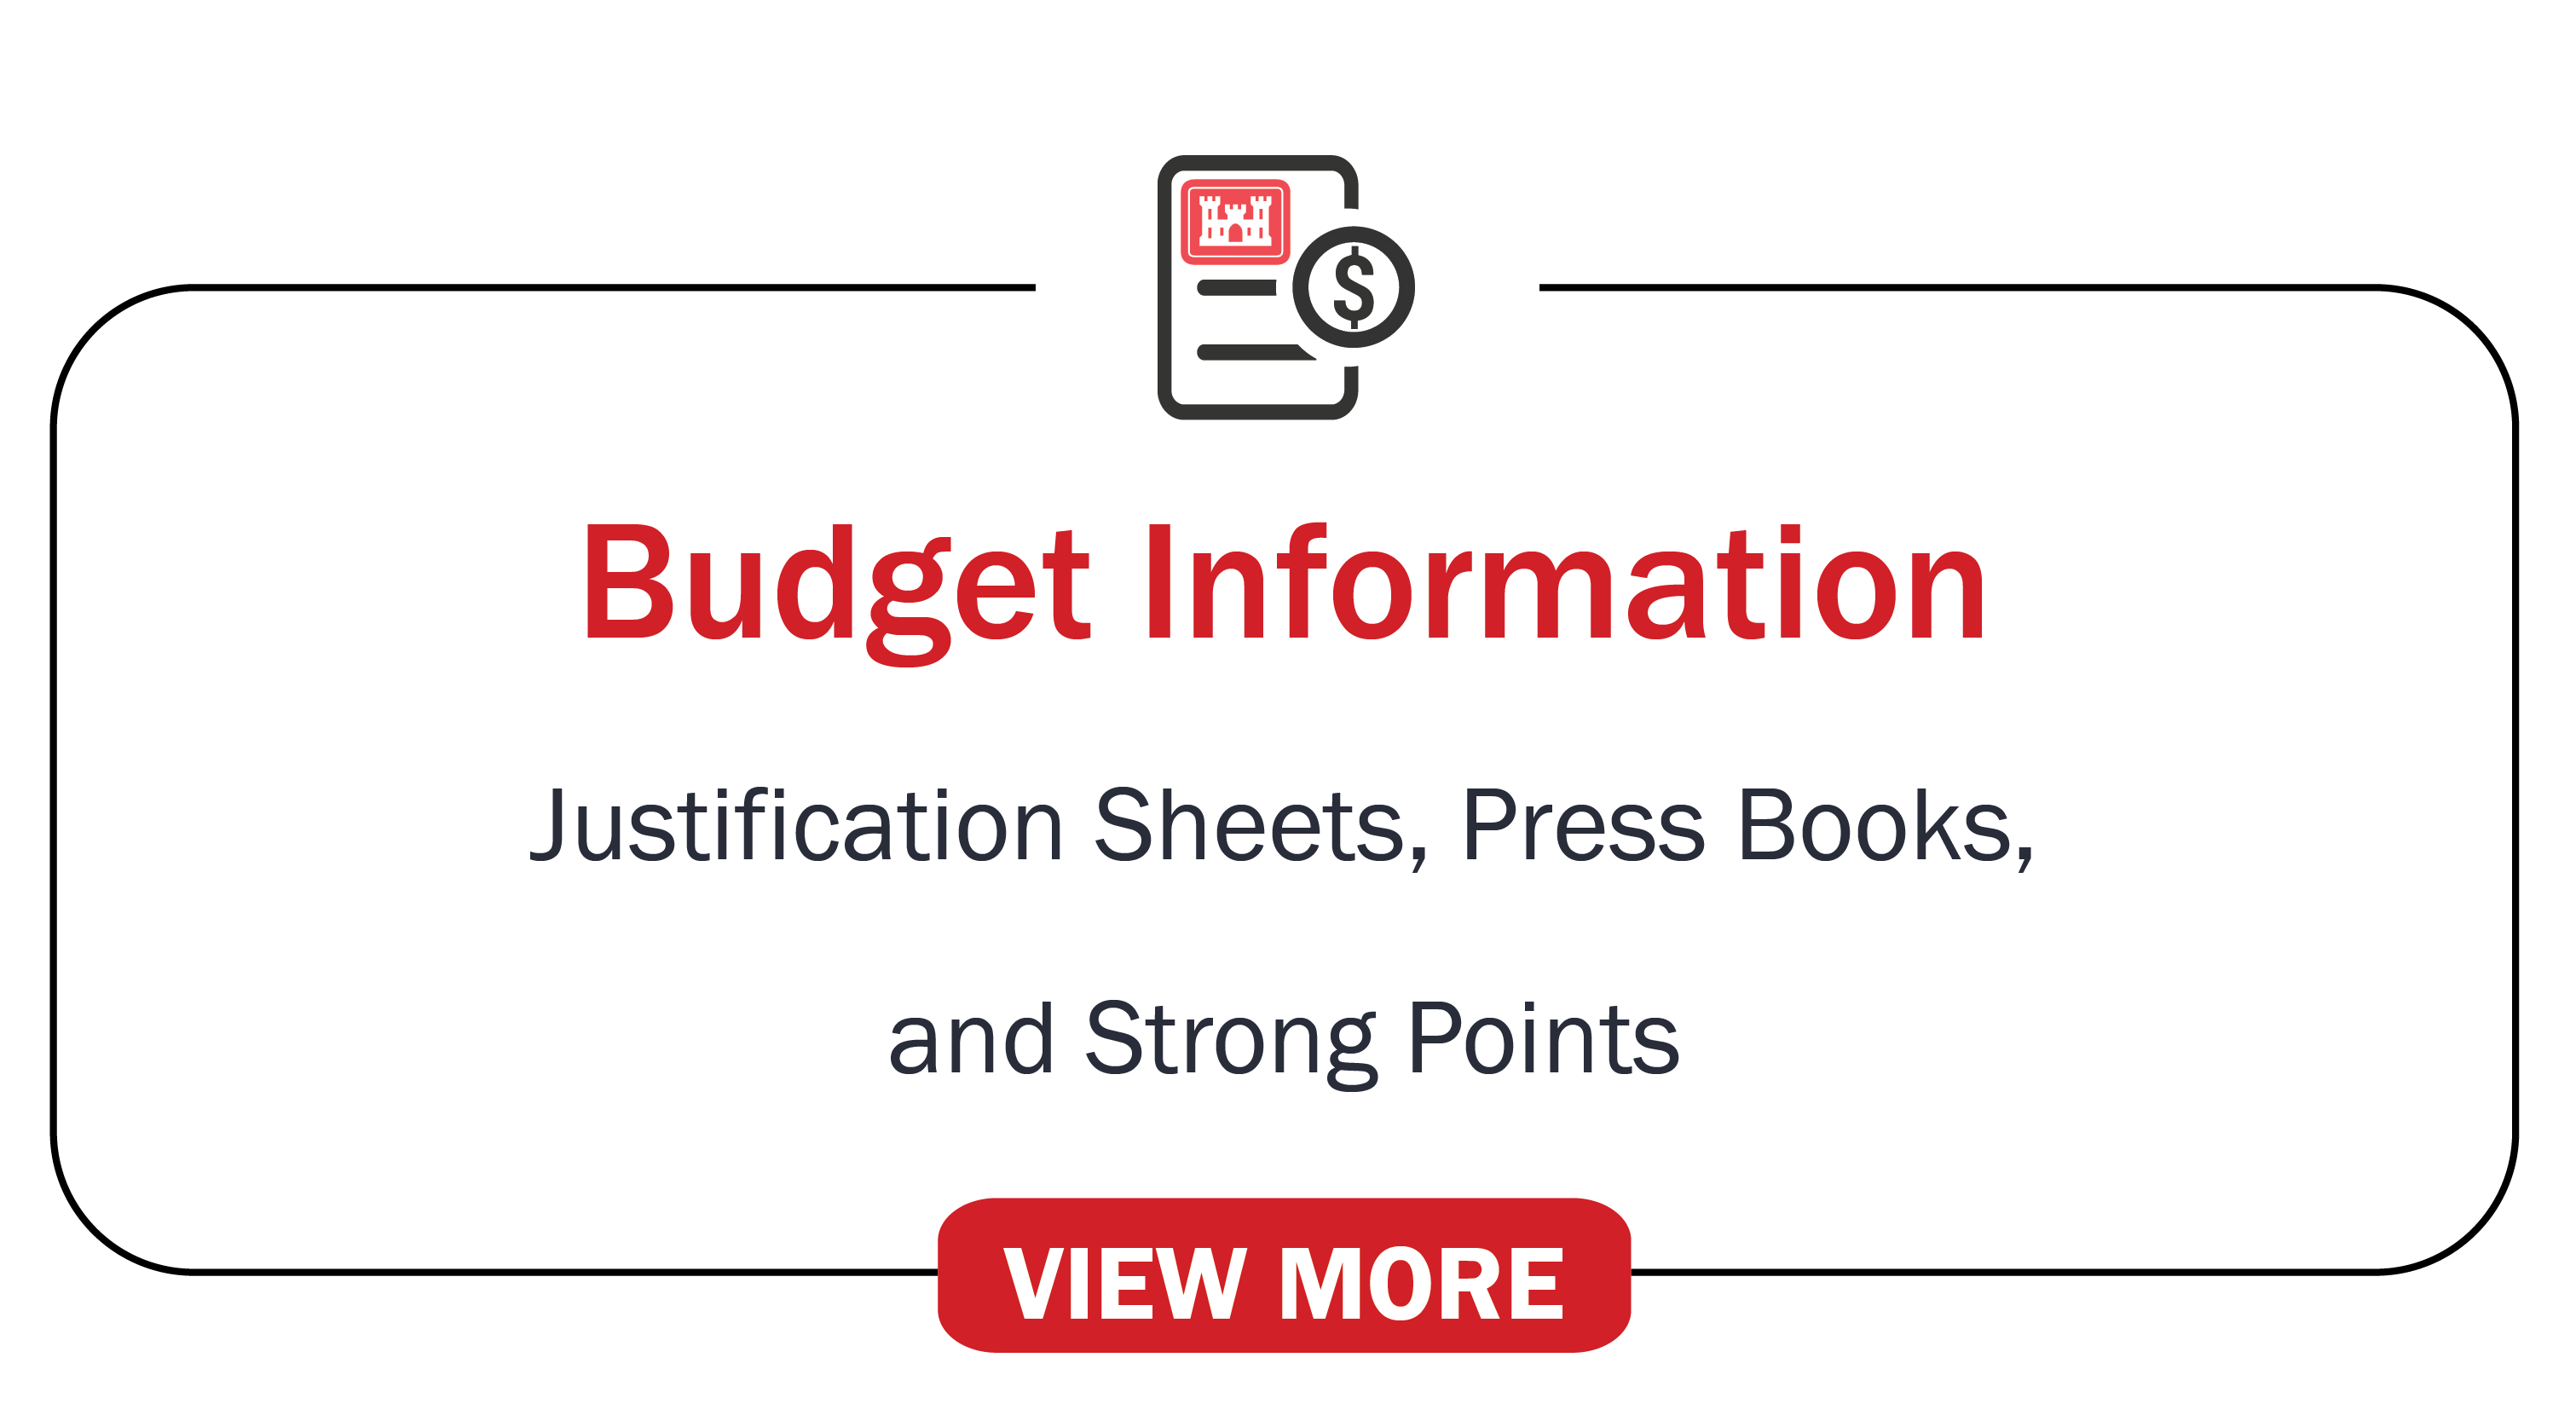 Budget Information: Justification Sheets, Press Books and Strong Points